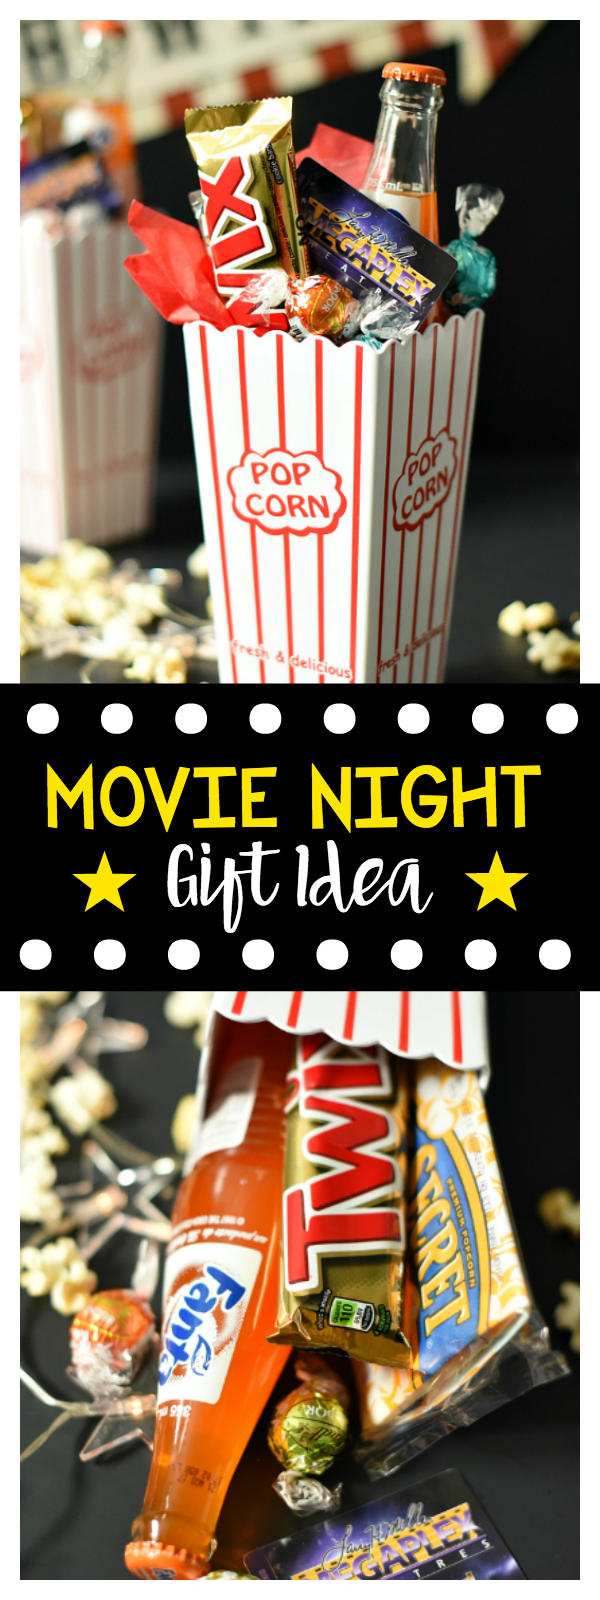 Movie Night Gift Basket-Great Gift for Birthdays, Teacher Appreciation or Thank Yous!